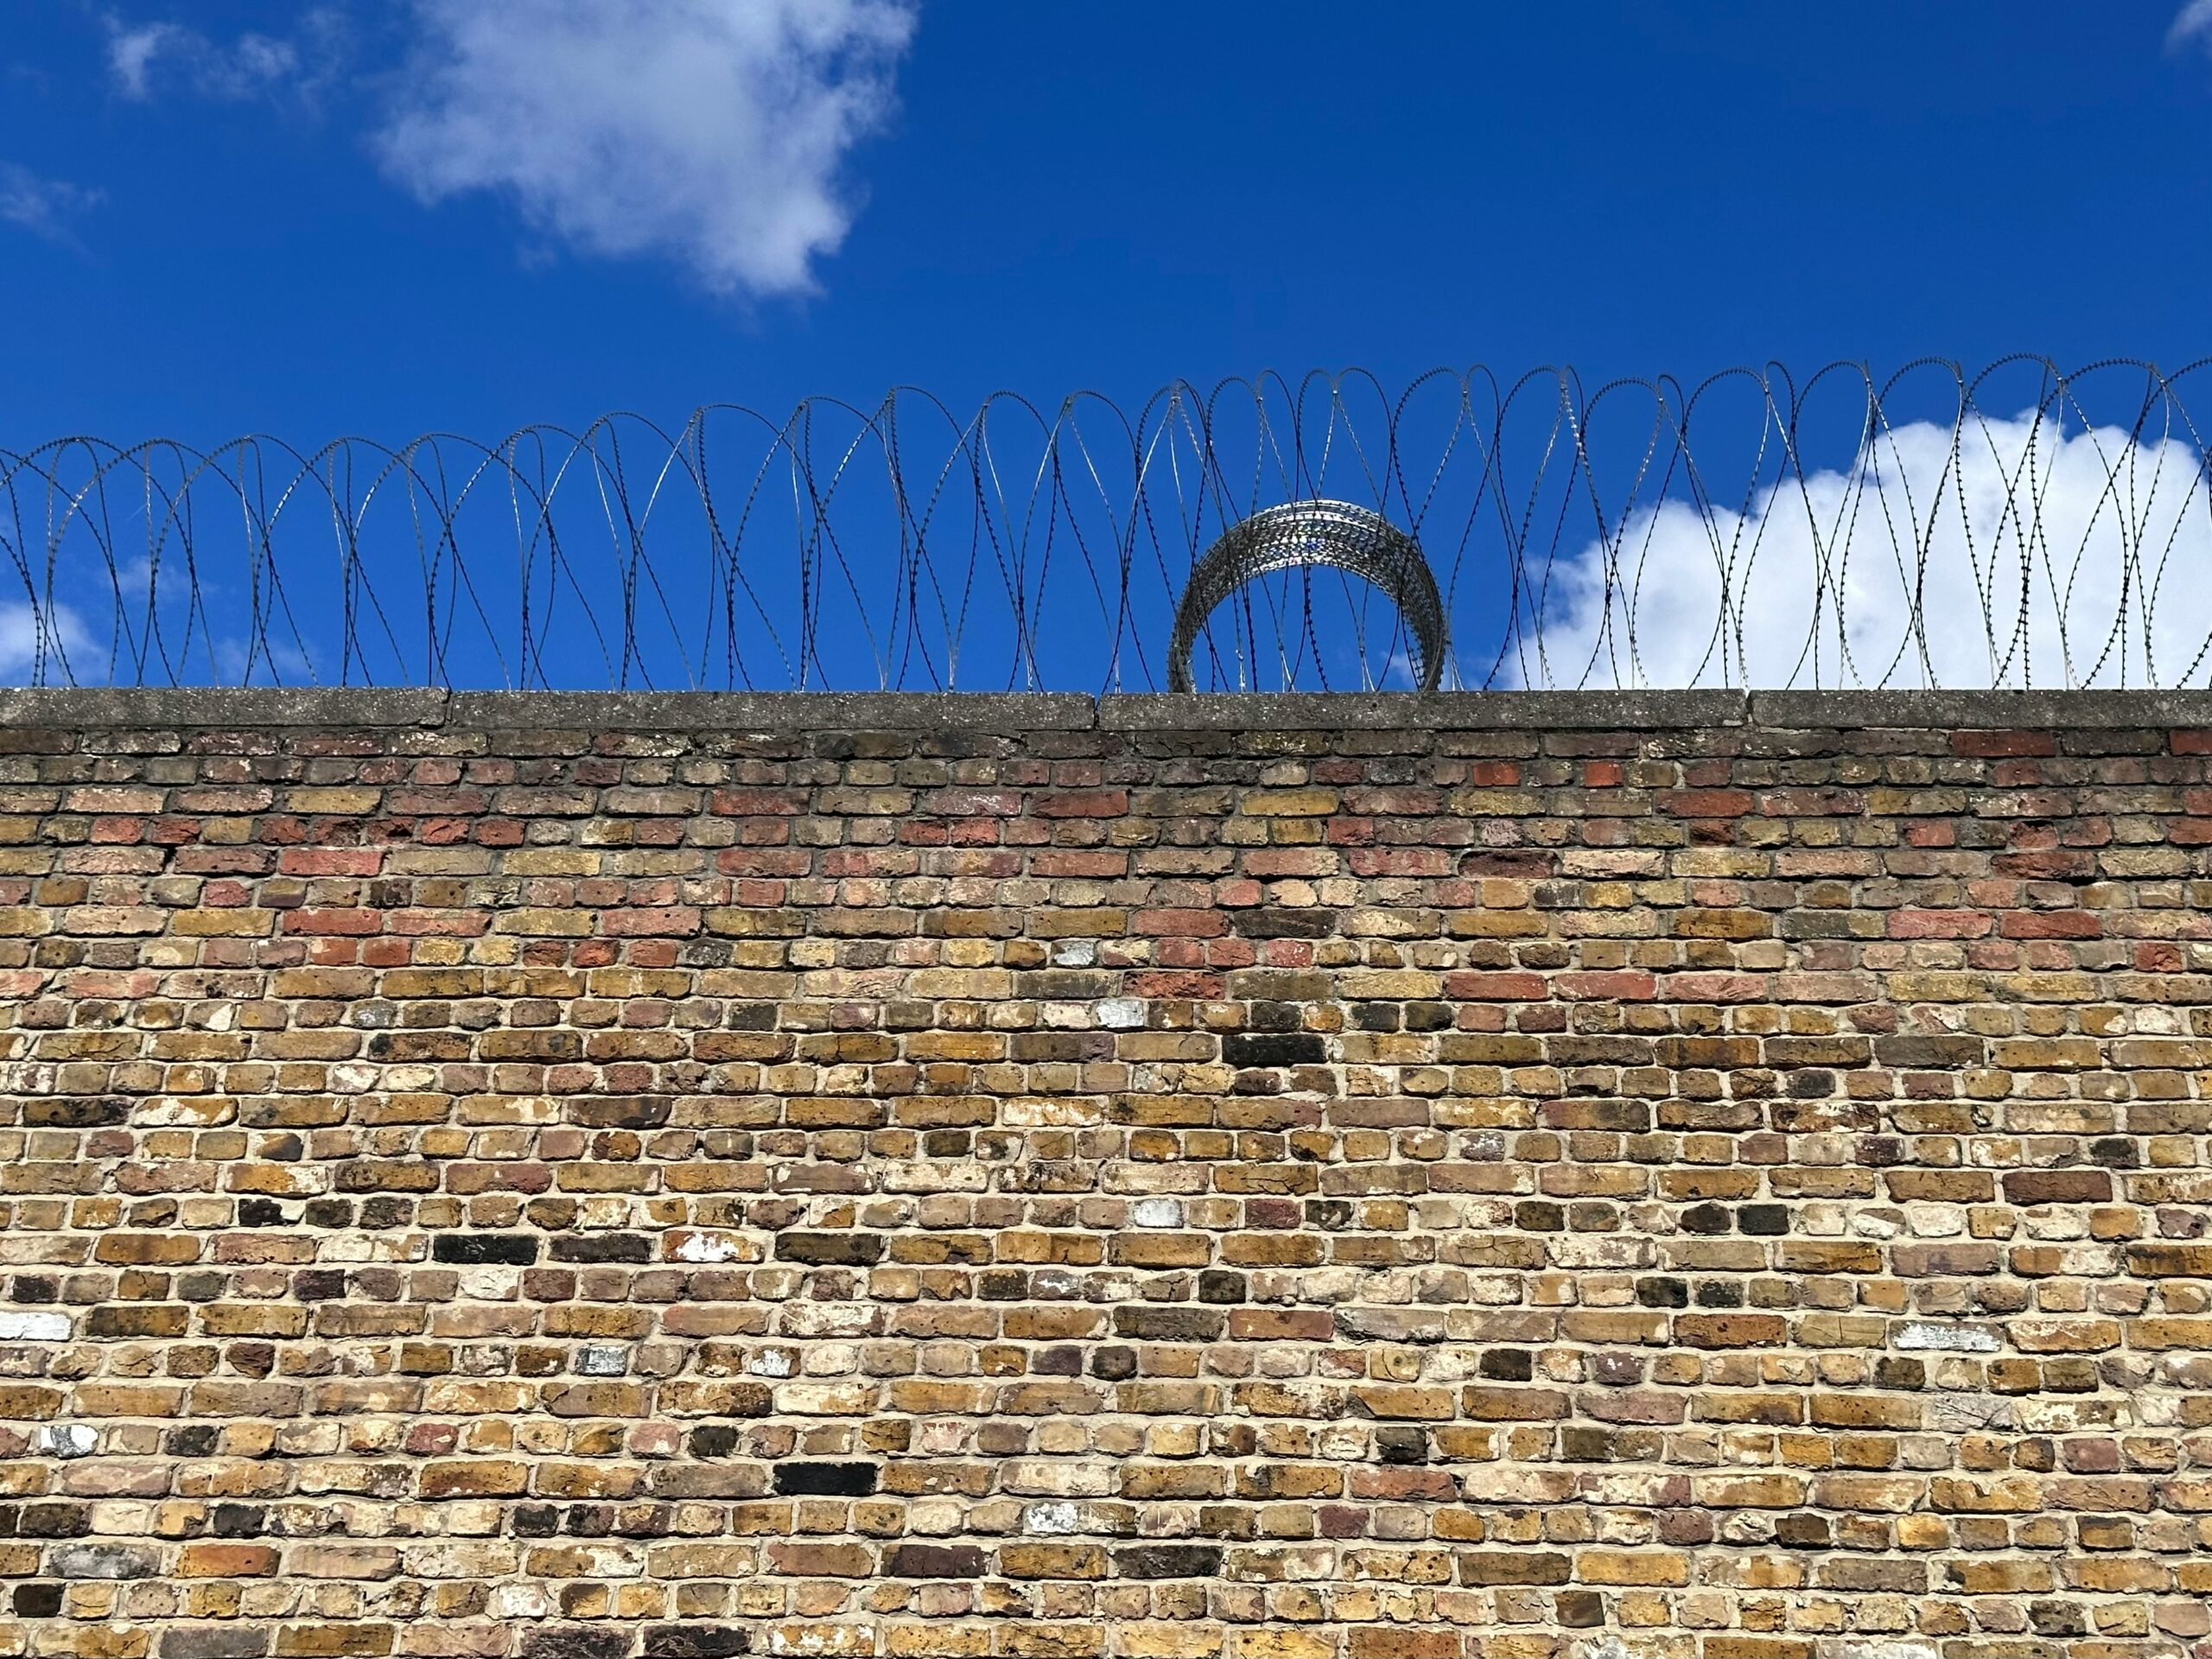 The wall of a prison seen from the outside.